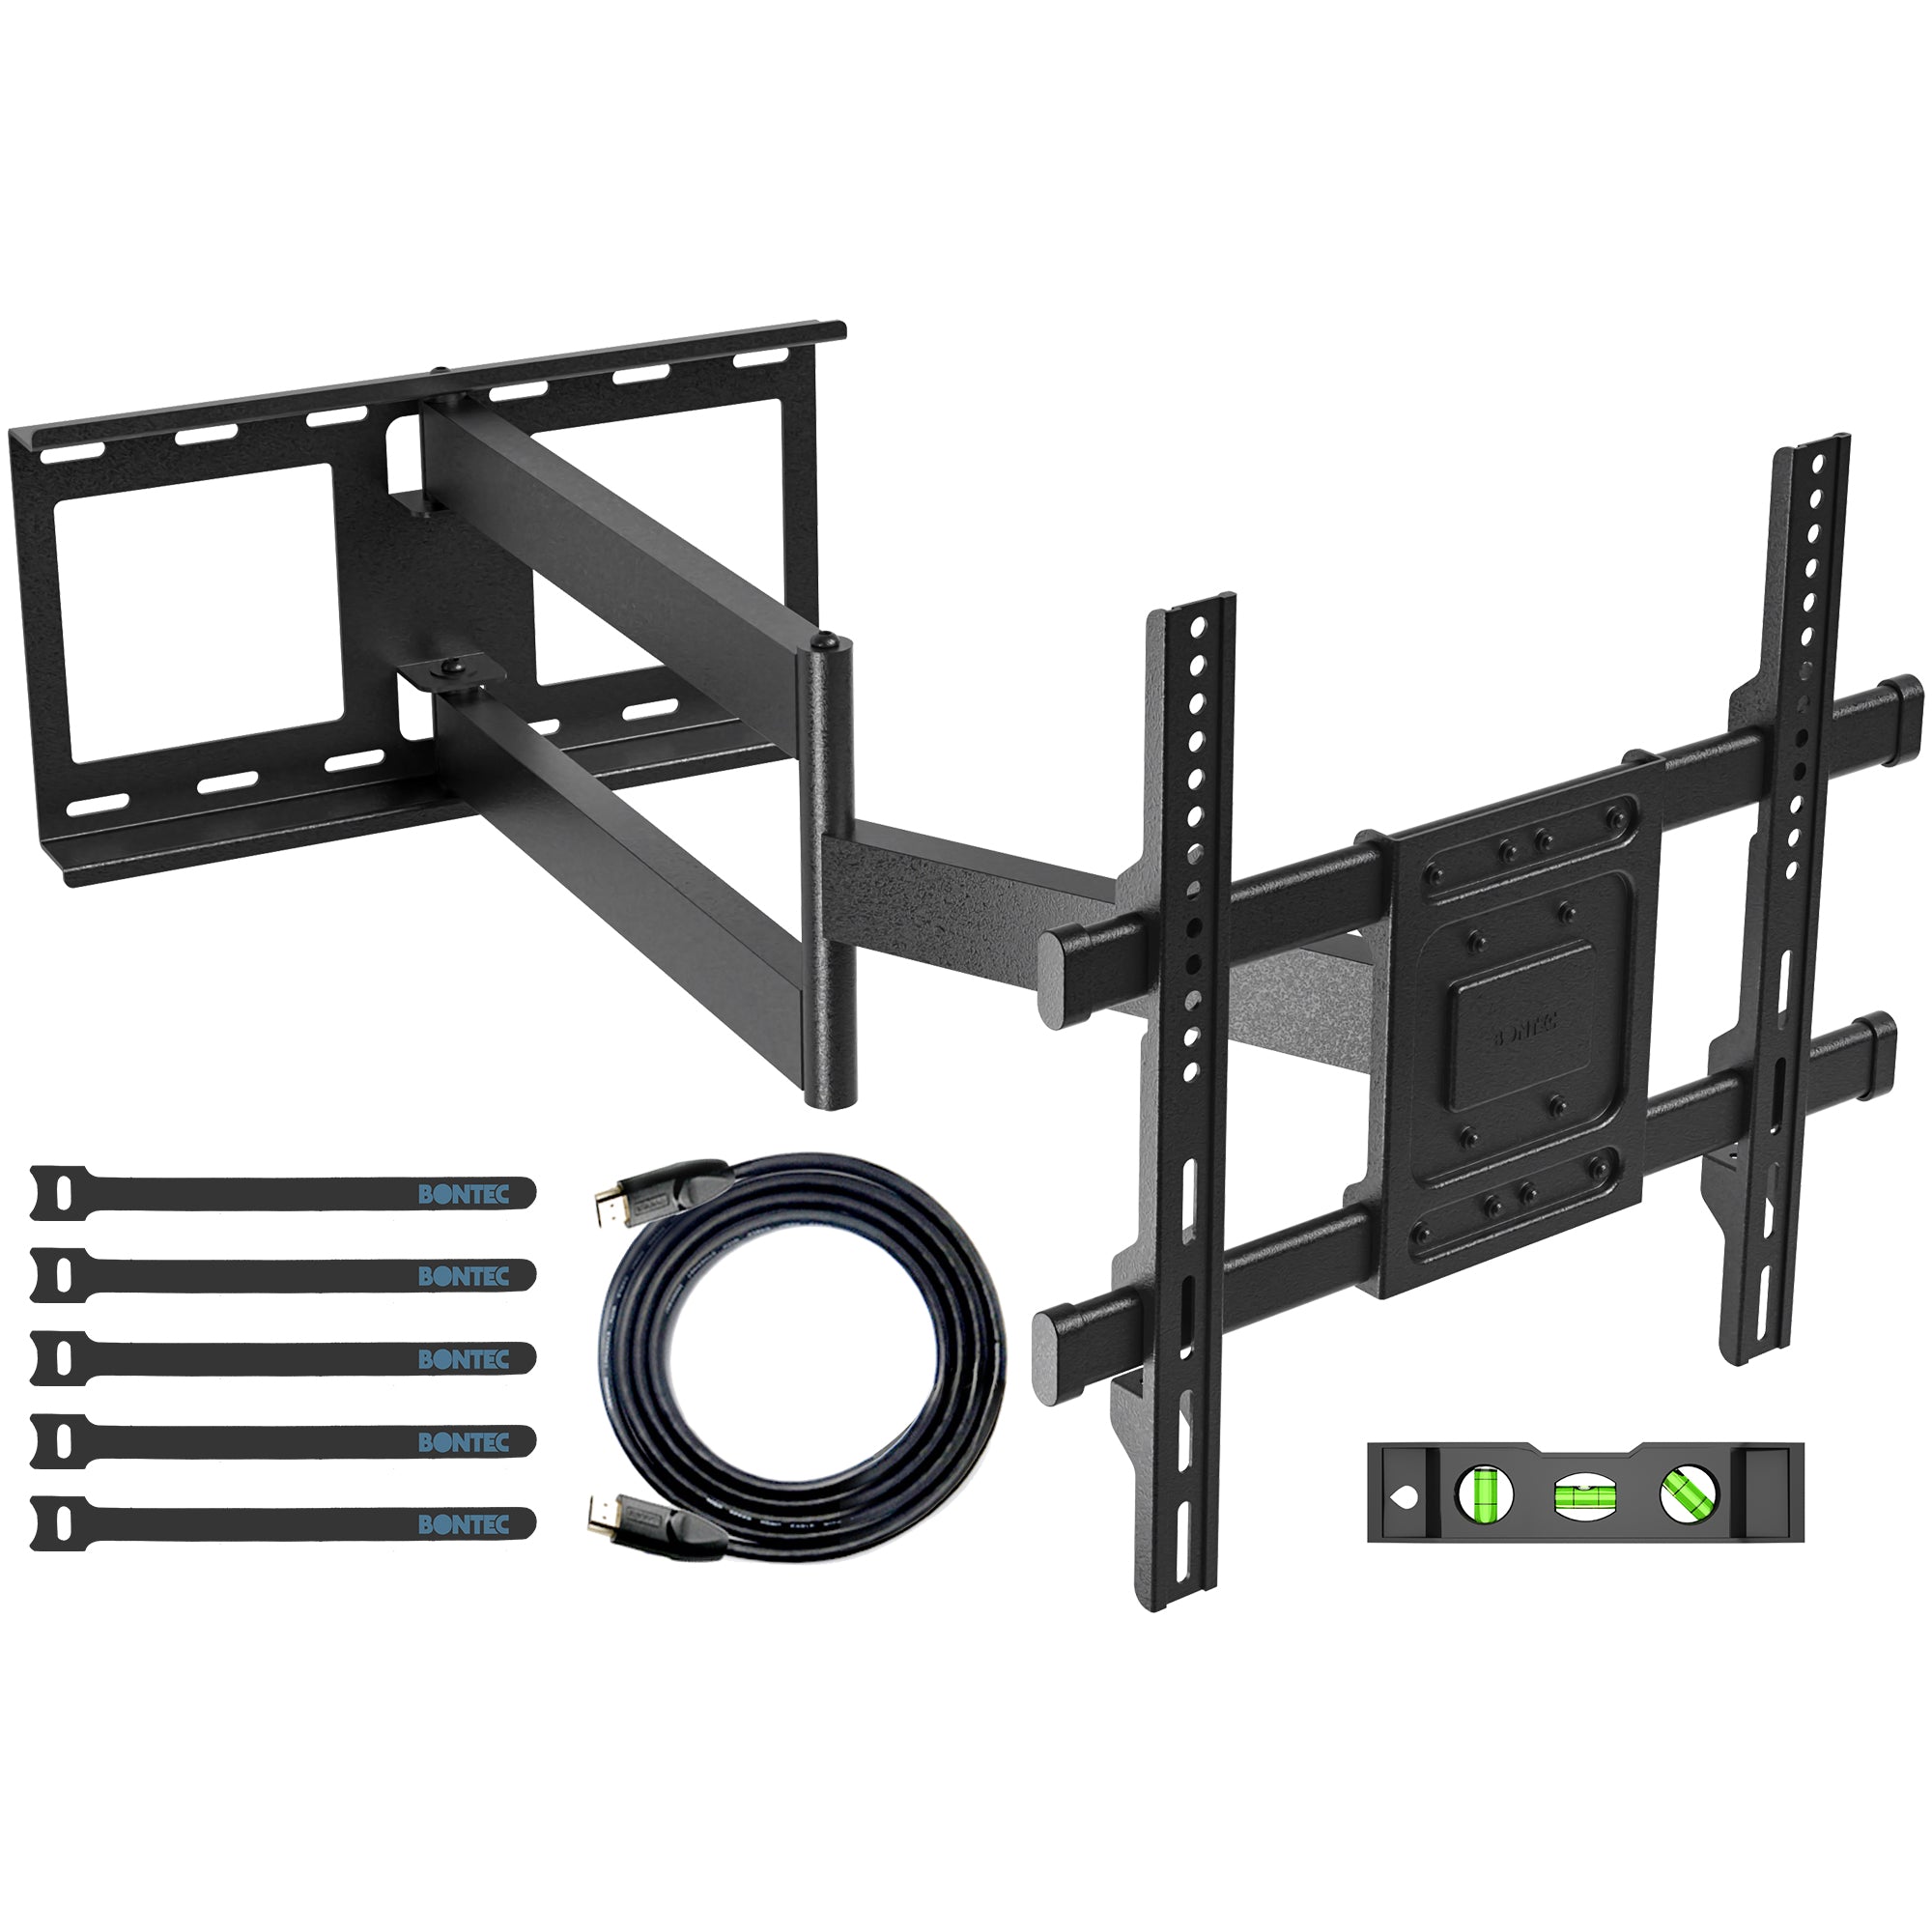 BONTEC TV Wall Bracket with Extra Long Articulated Arm for 32-70 inch